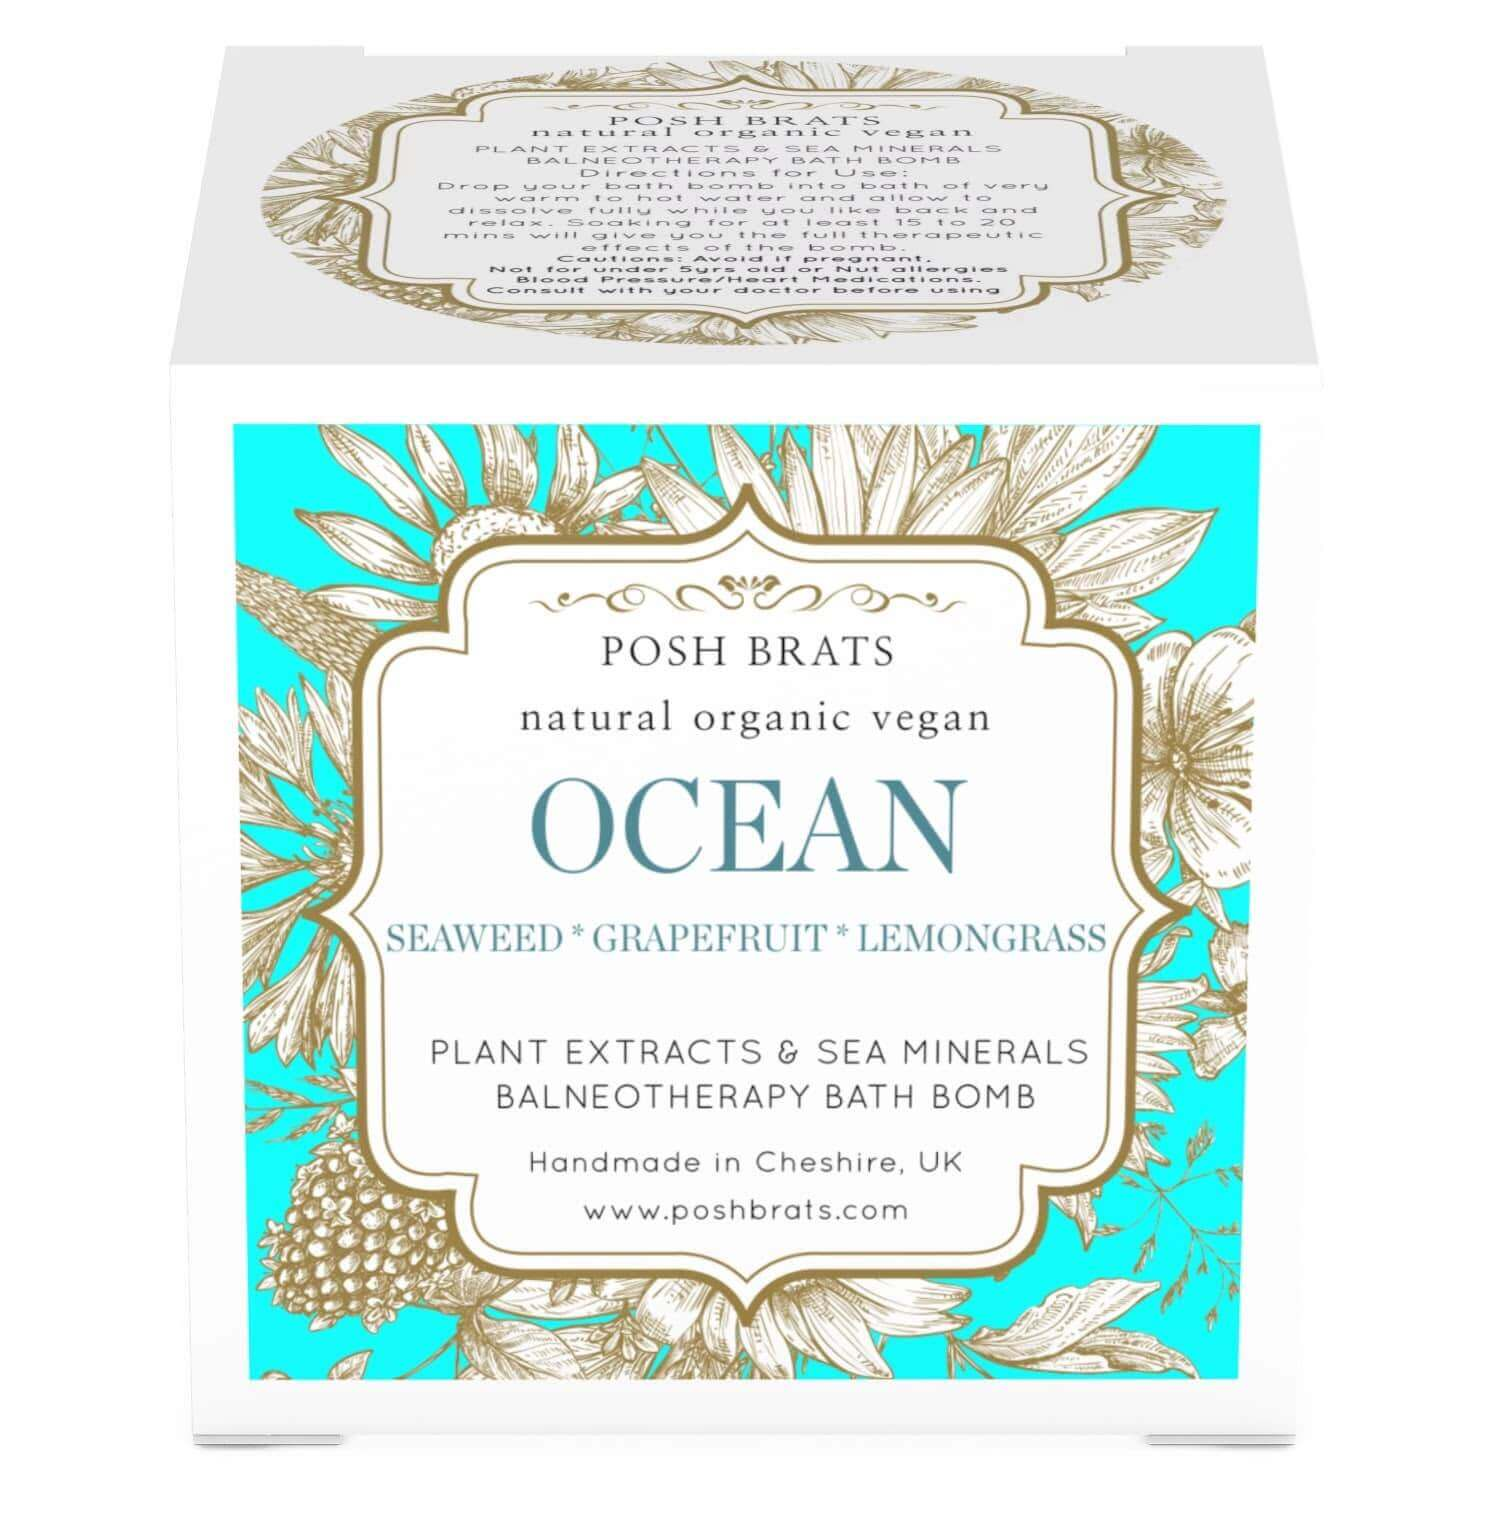 Ocean Sea Minerals Aromatherapy Bath Bomb: Enjoy a soothing, spa-like experience at home. Unwind with nature's best minerals!